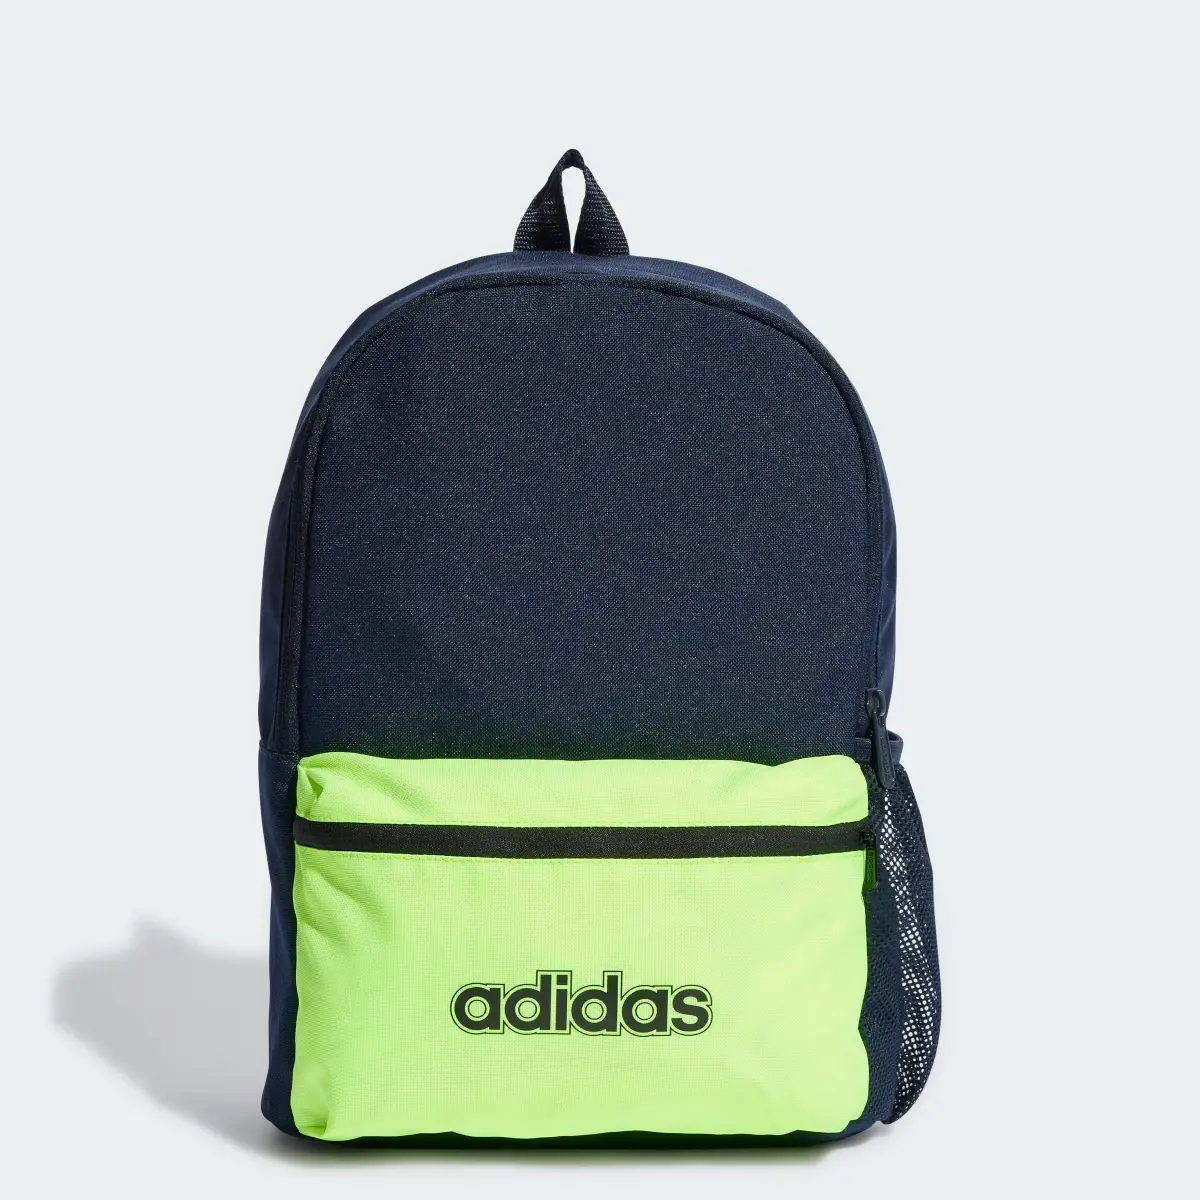 Adidas Graphic Backpack. 1